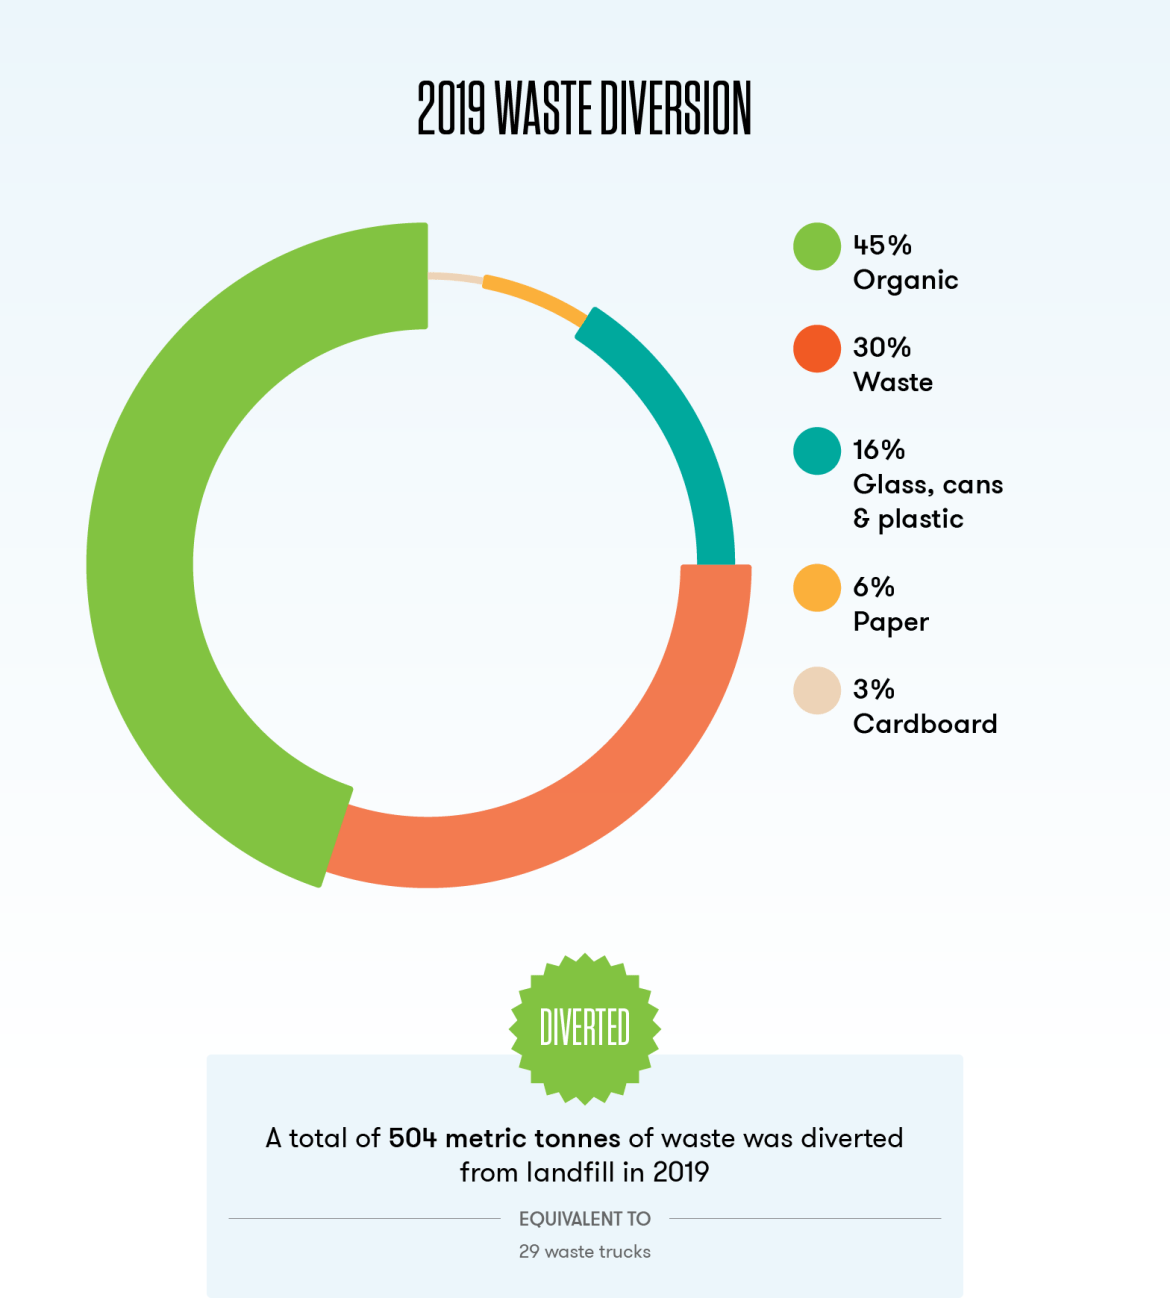 This pie chart shows that the CN Tower diverted a total of 504 metric tonnes of waste from landfill in 2019.